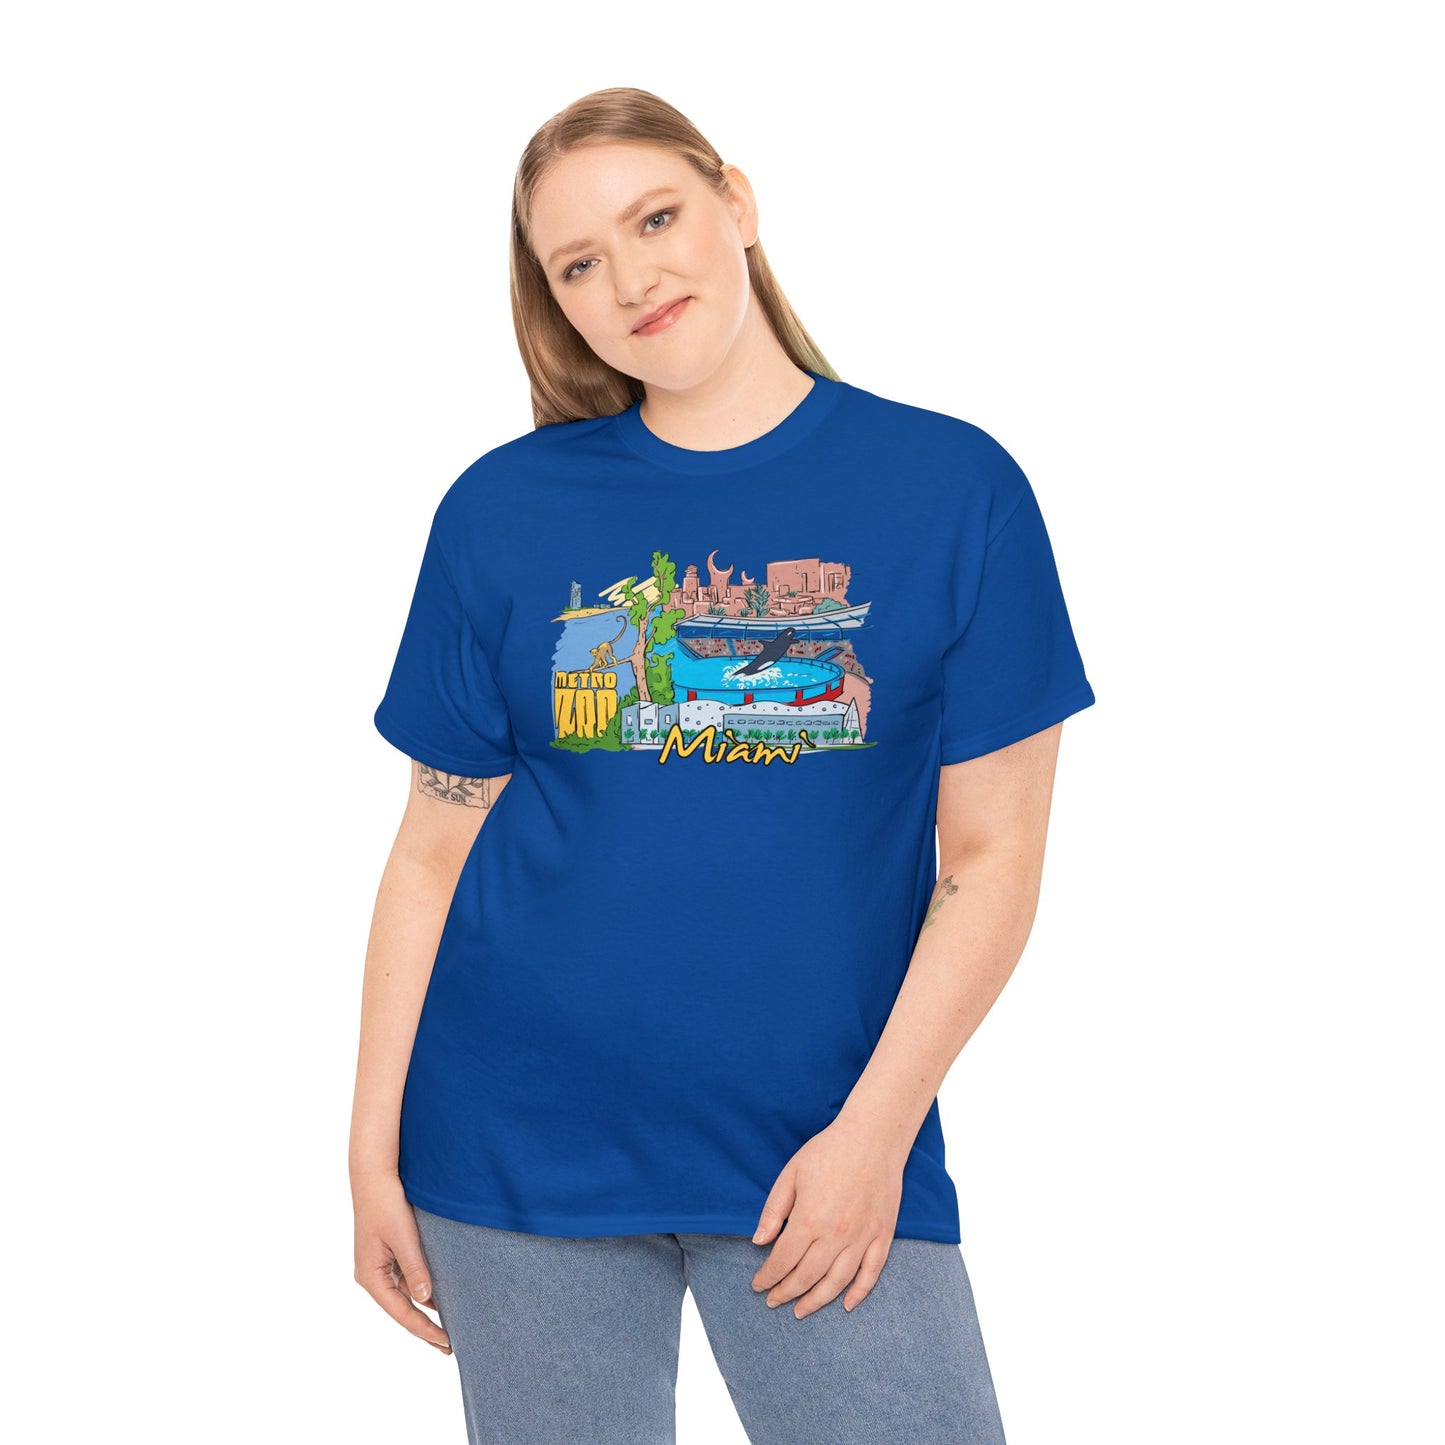 Discover Miami Vibes: Stylish and Comfortable T-Shirt for a Trendy Look!